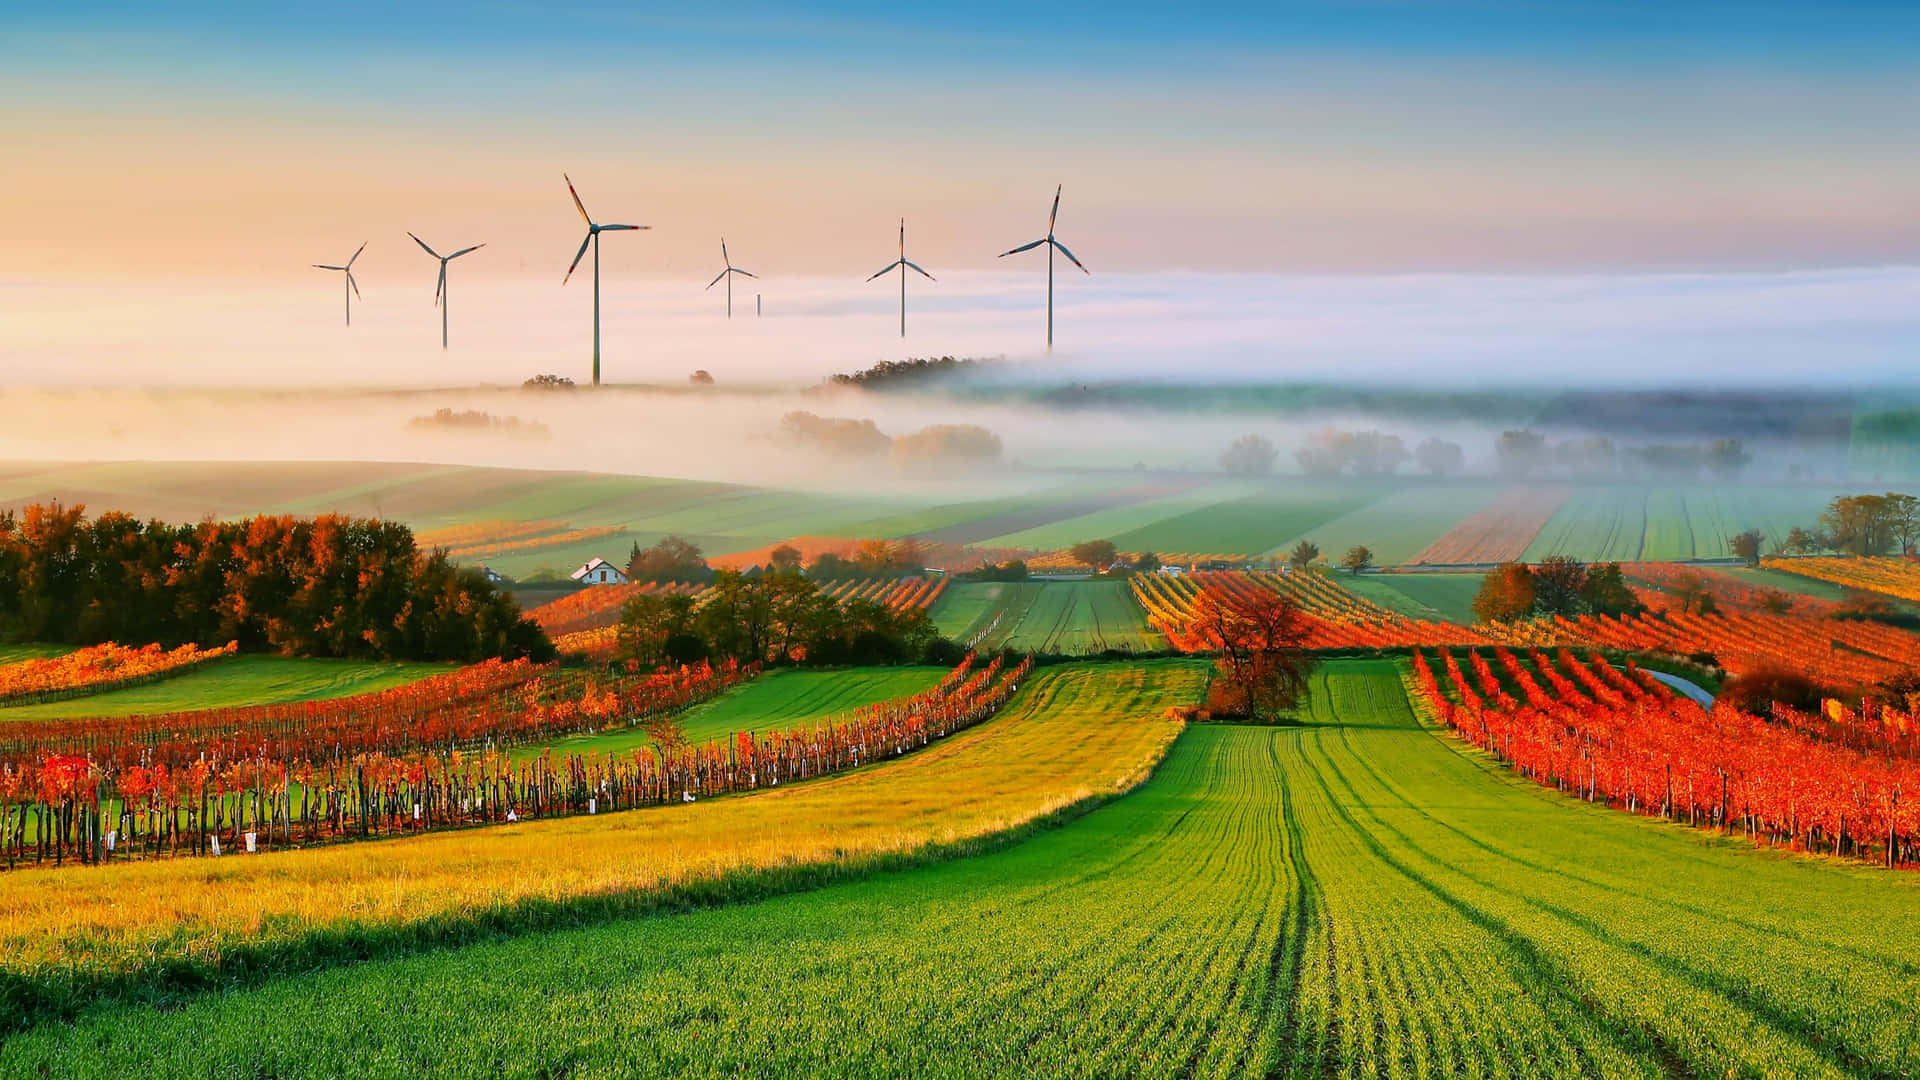 Wind Turbines In The Countryside With A Foggy Morning